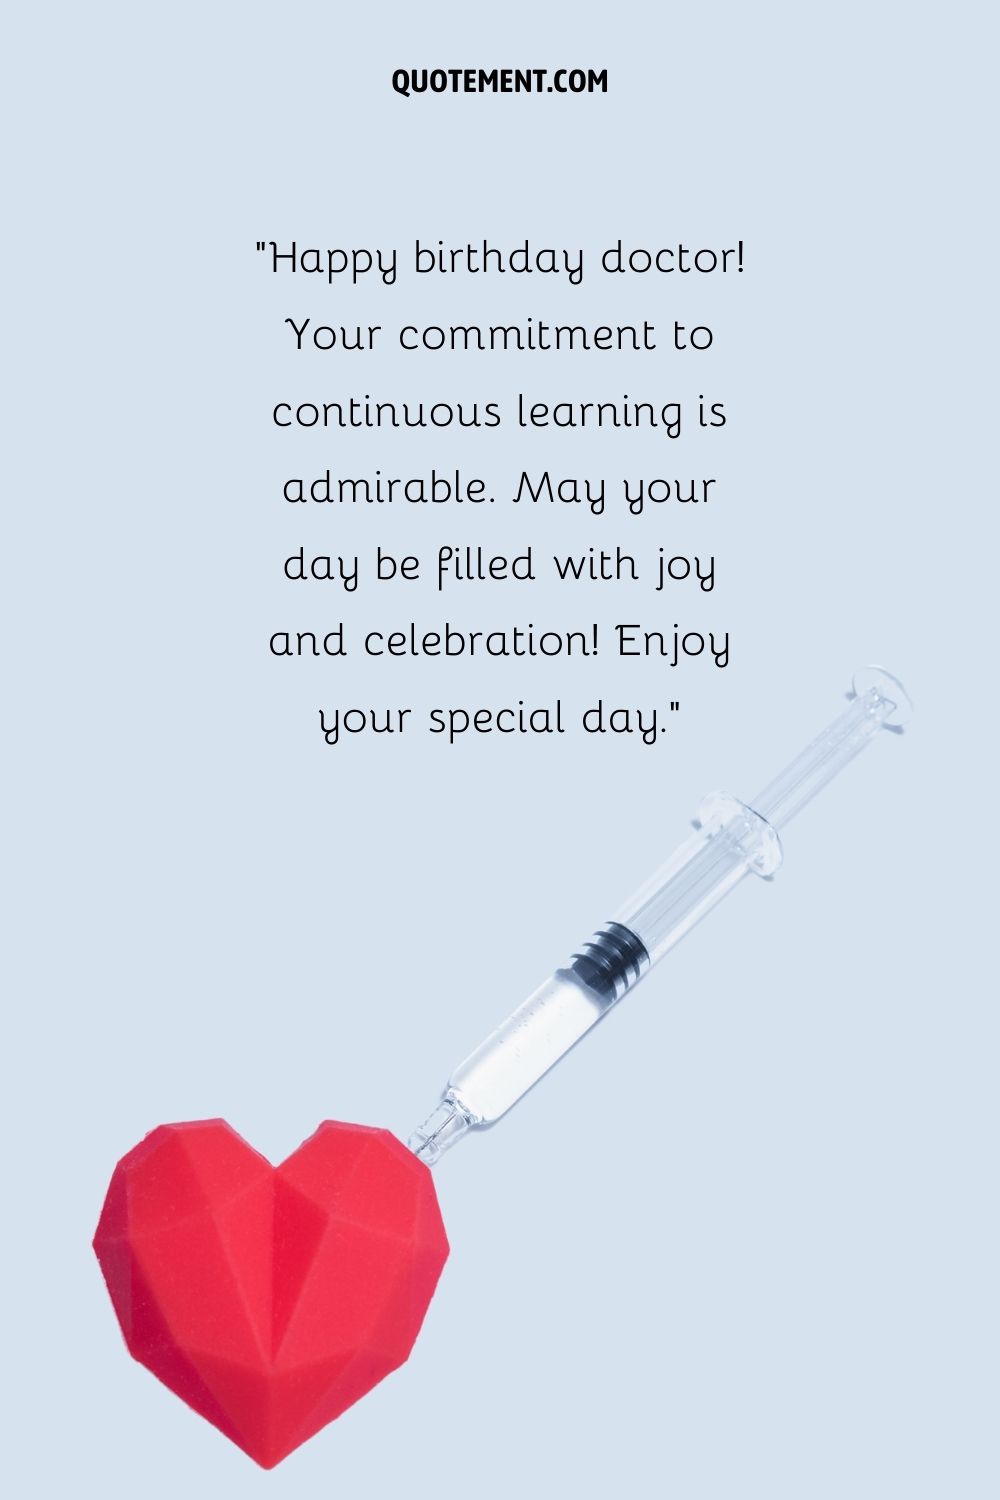 an injection and an red heart emoji representing best happy birthday doctor wish